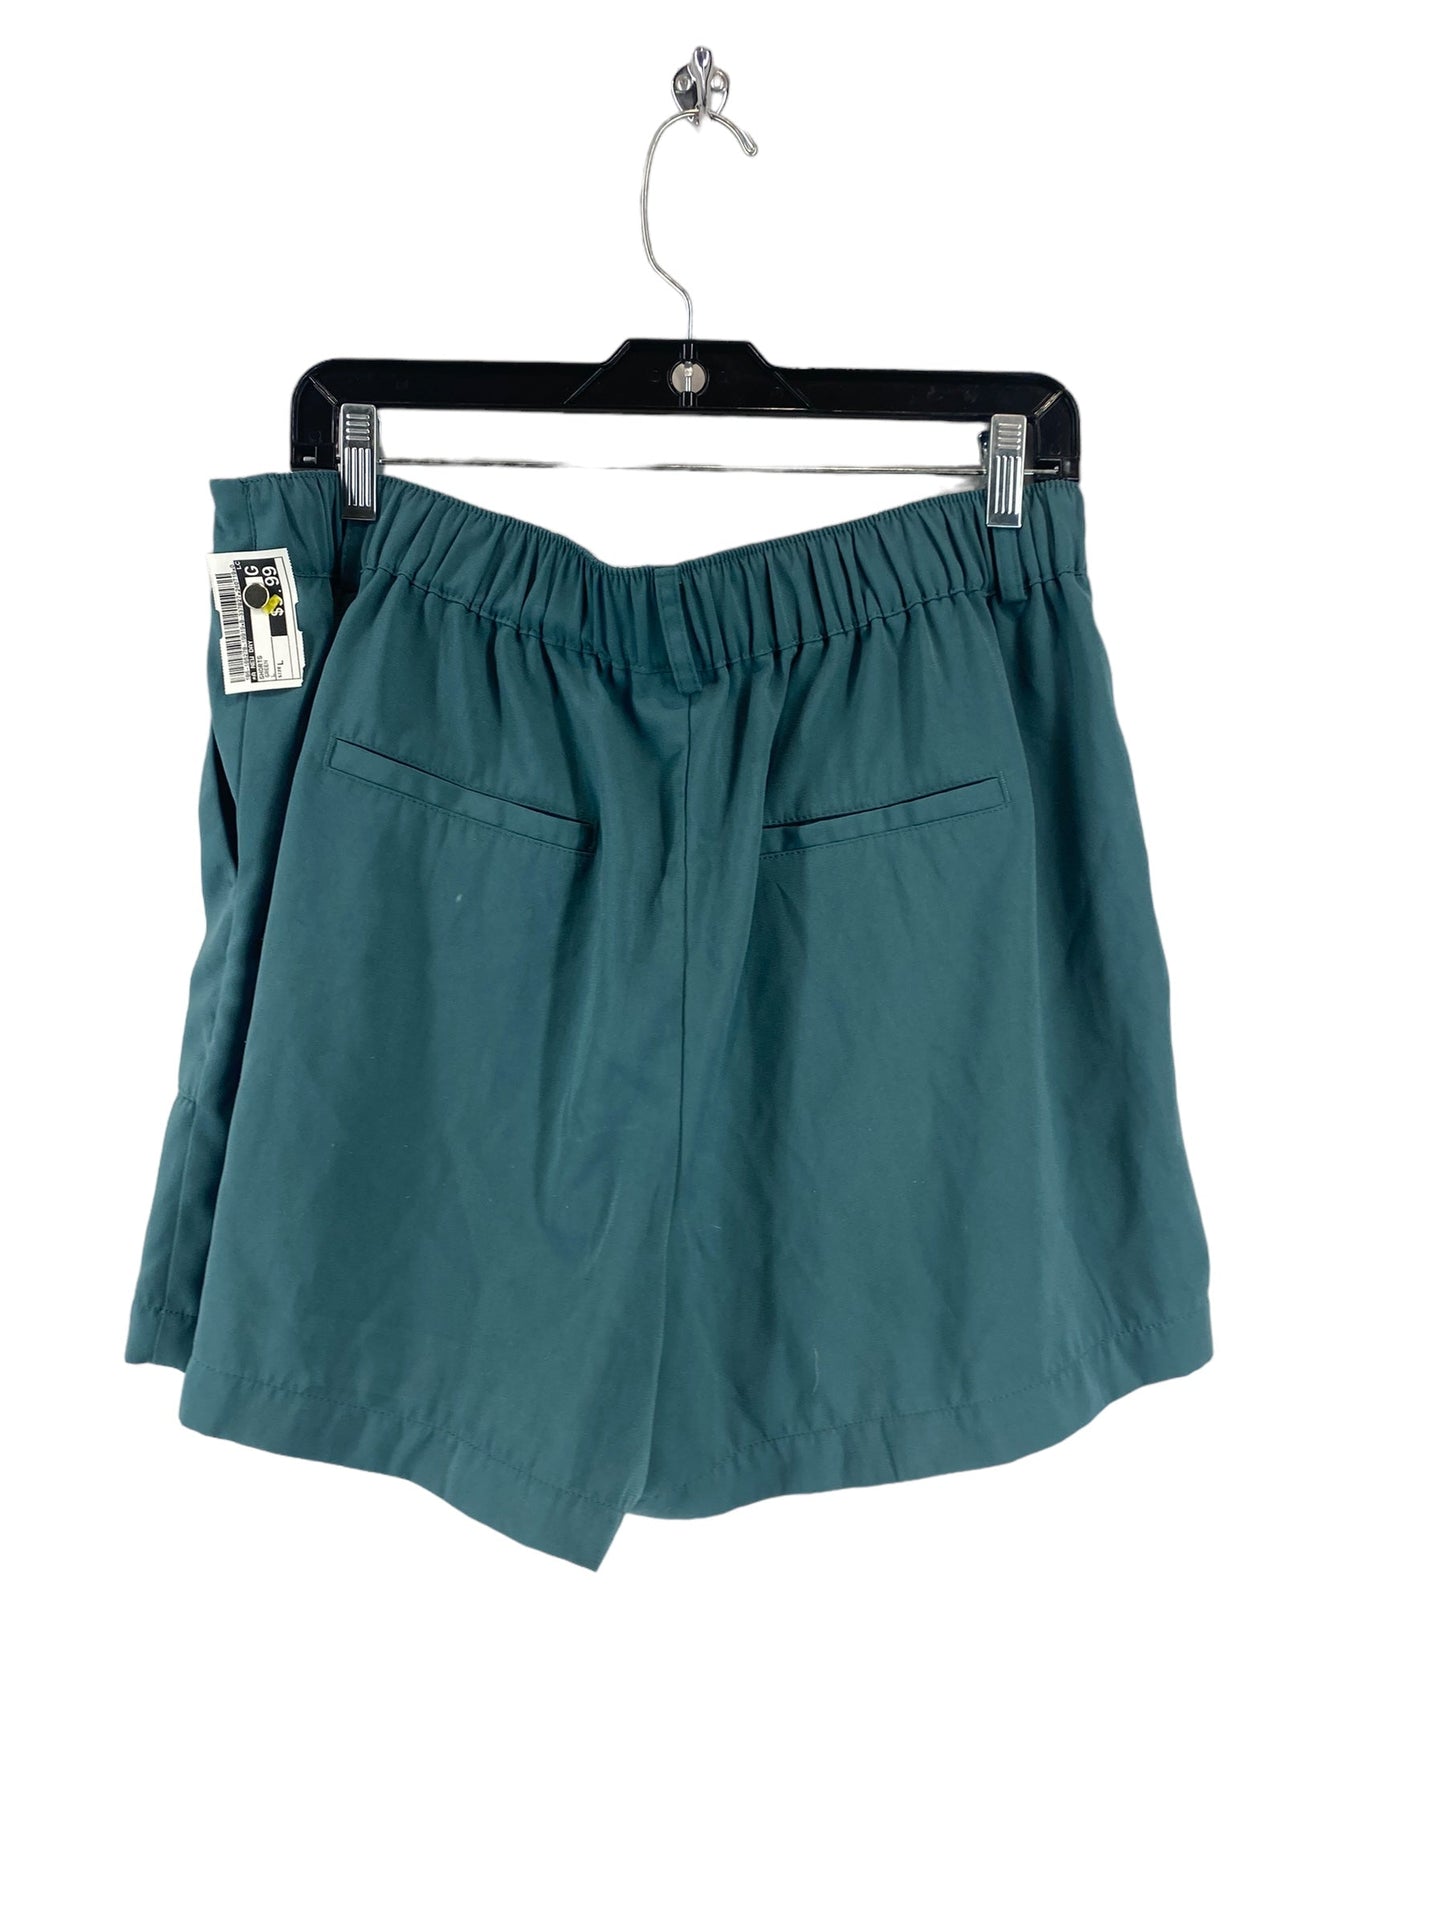 Green Shorts A New Day, Size L